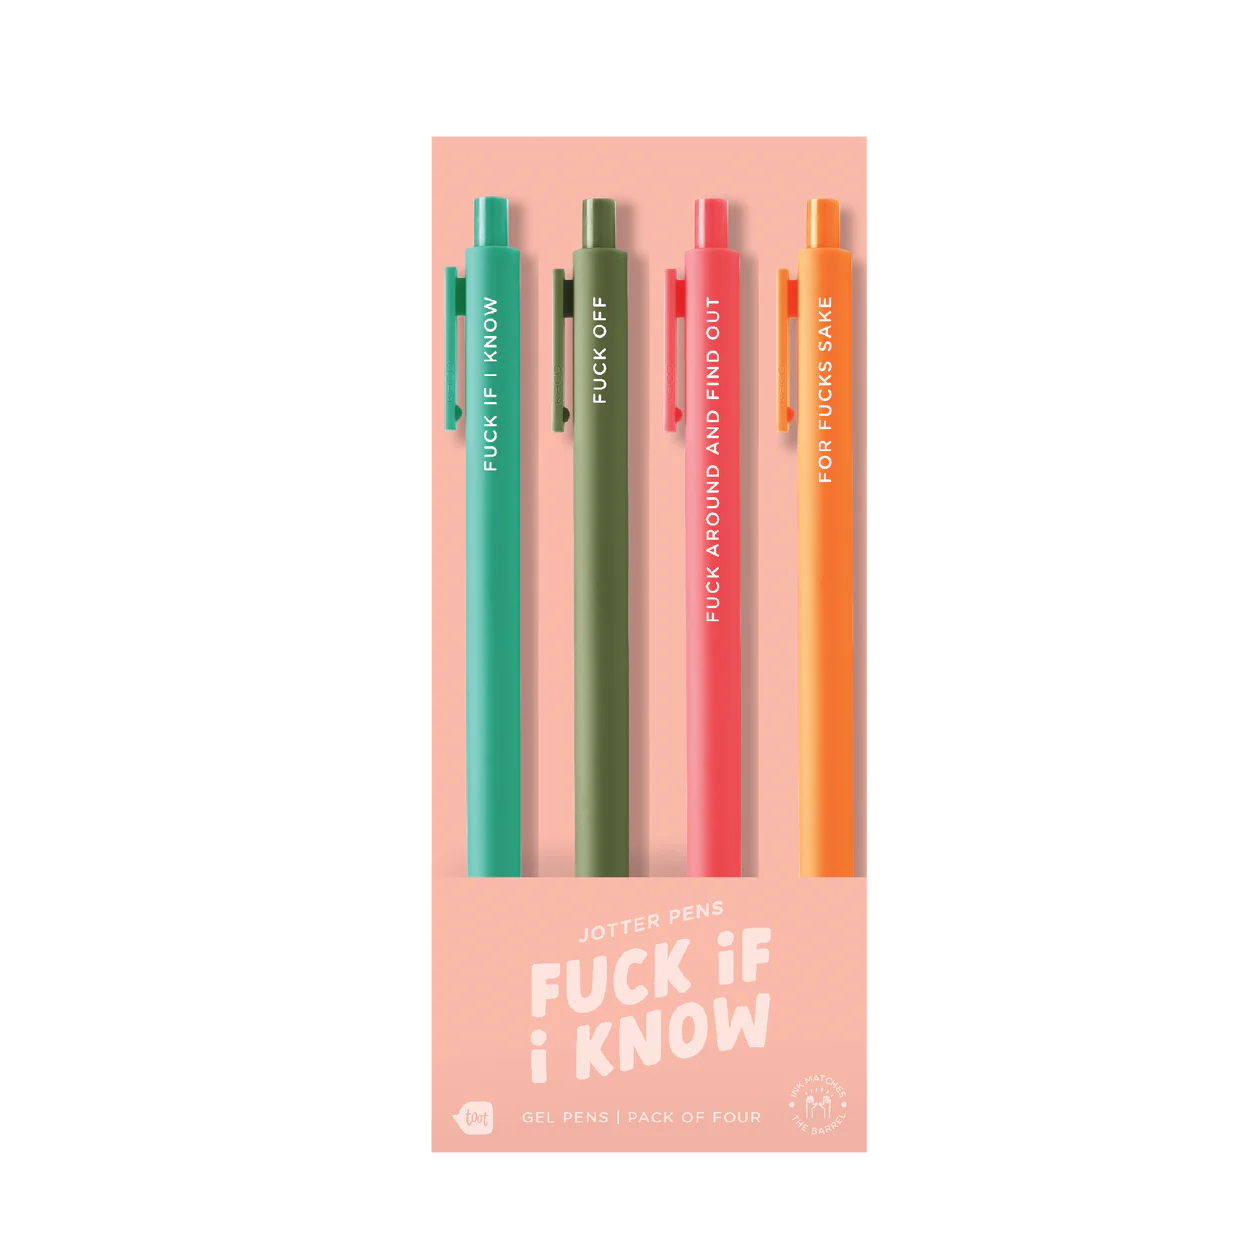 Fuck if I know jotter pens